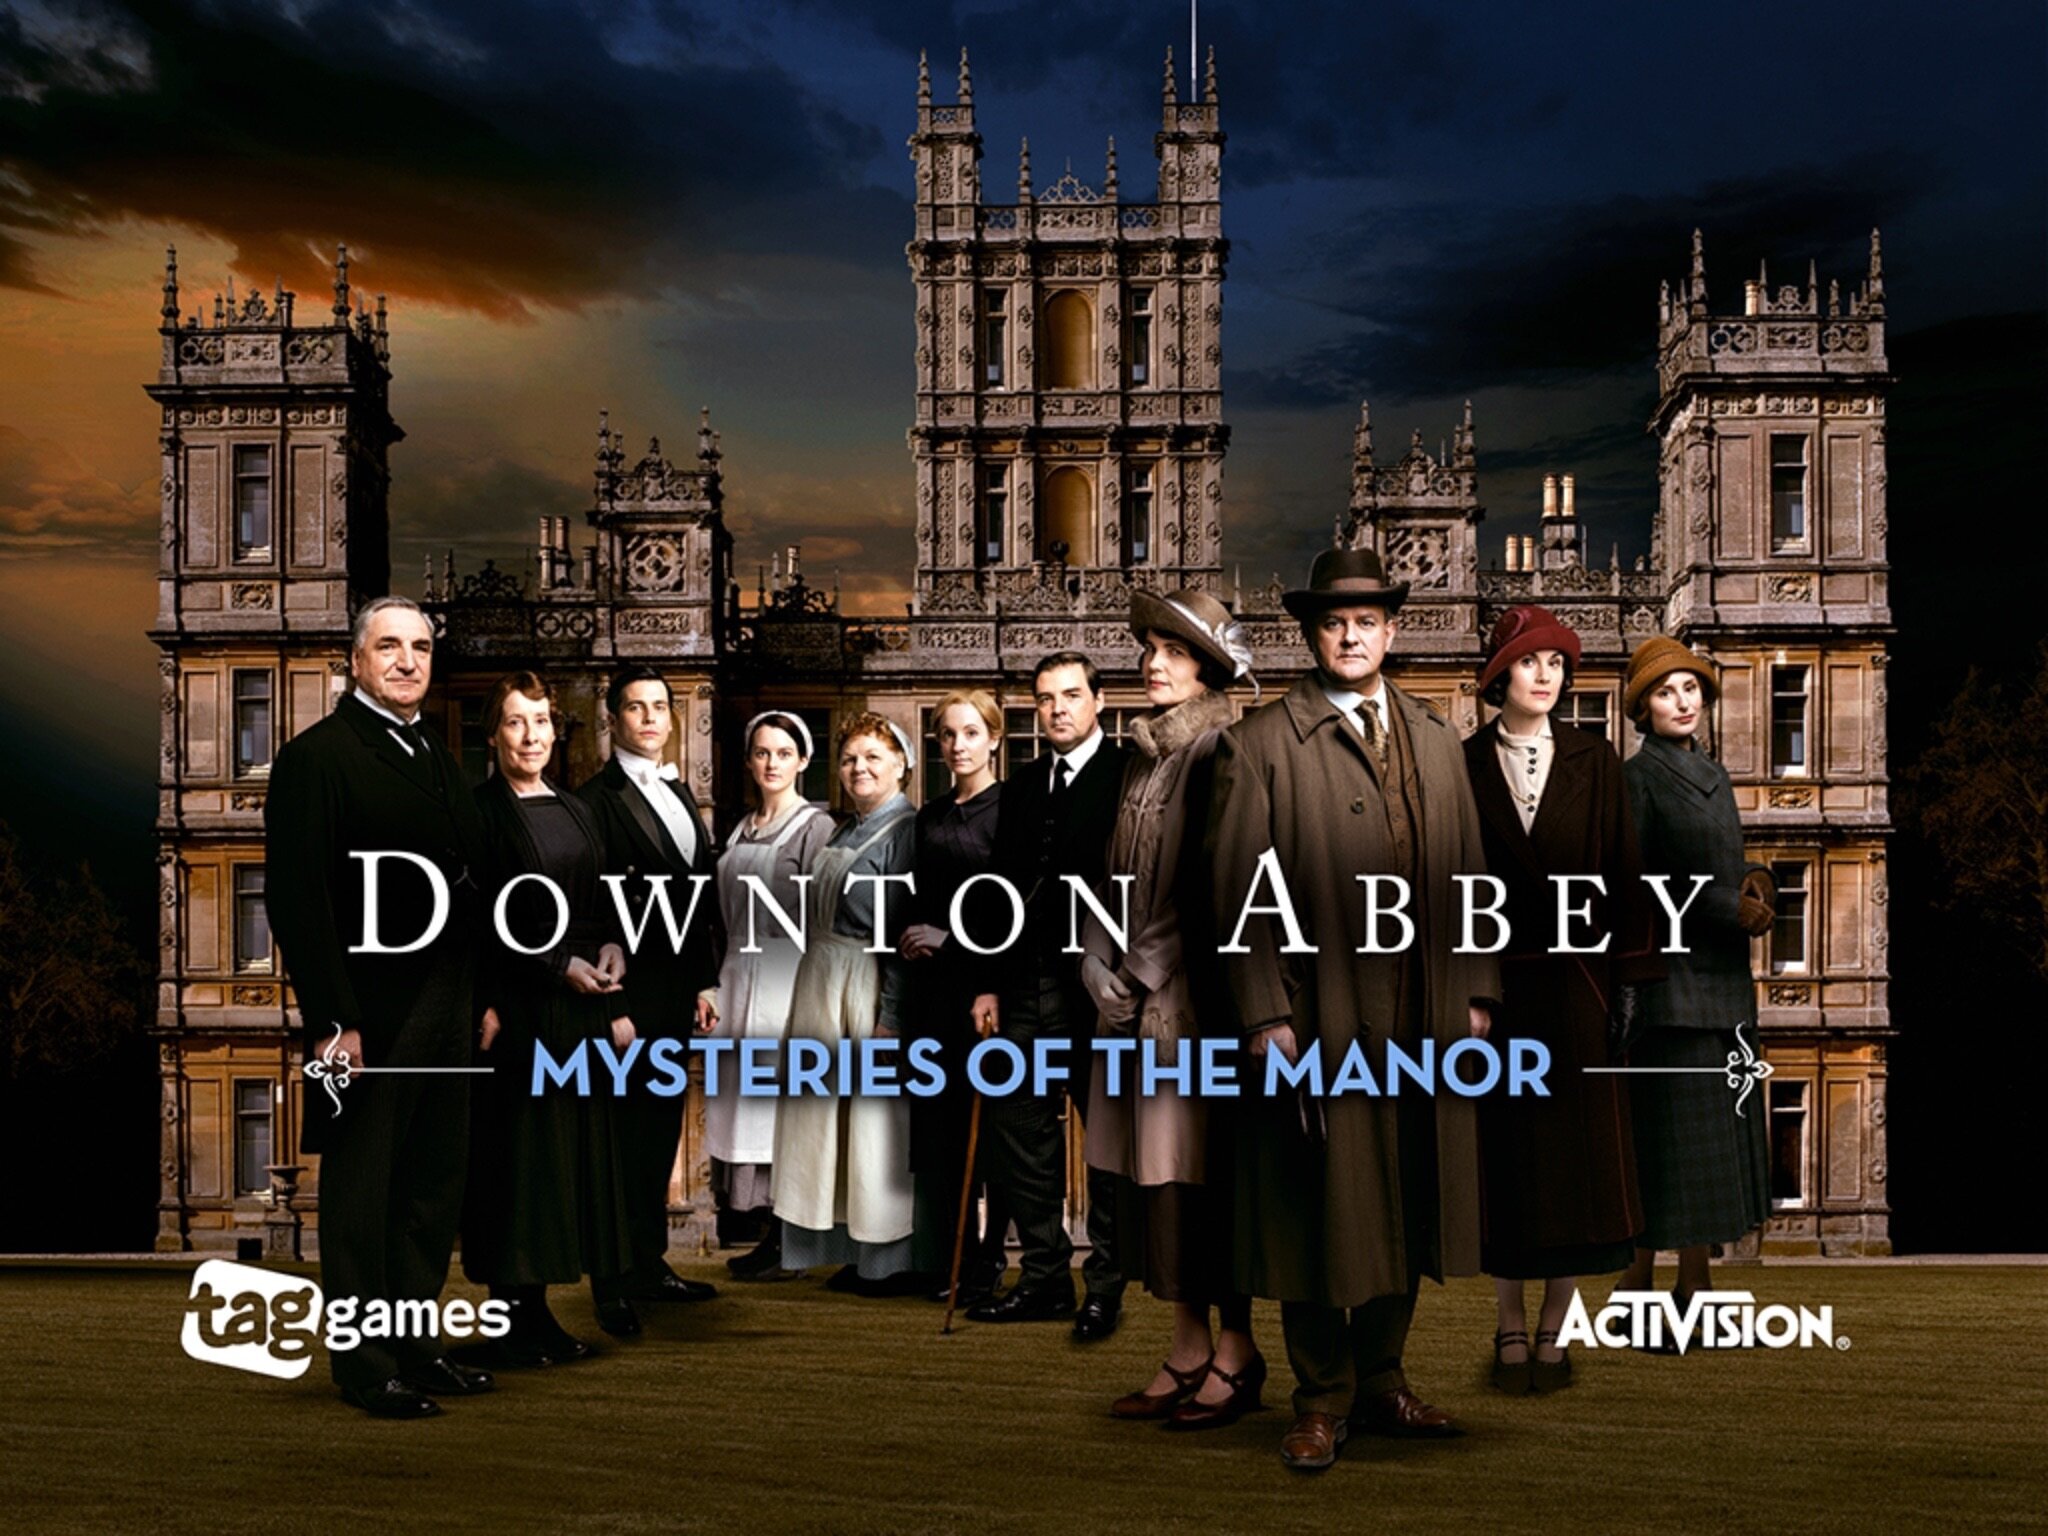 Downton Abbey: Mysteries of the Manor / Activision